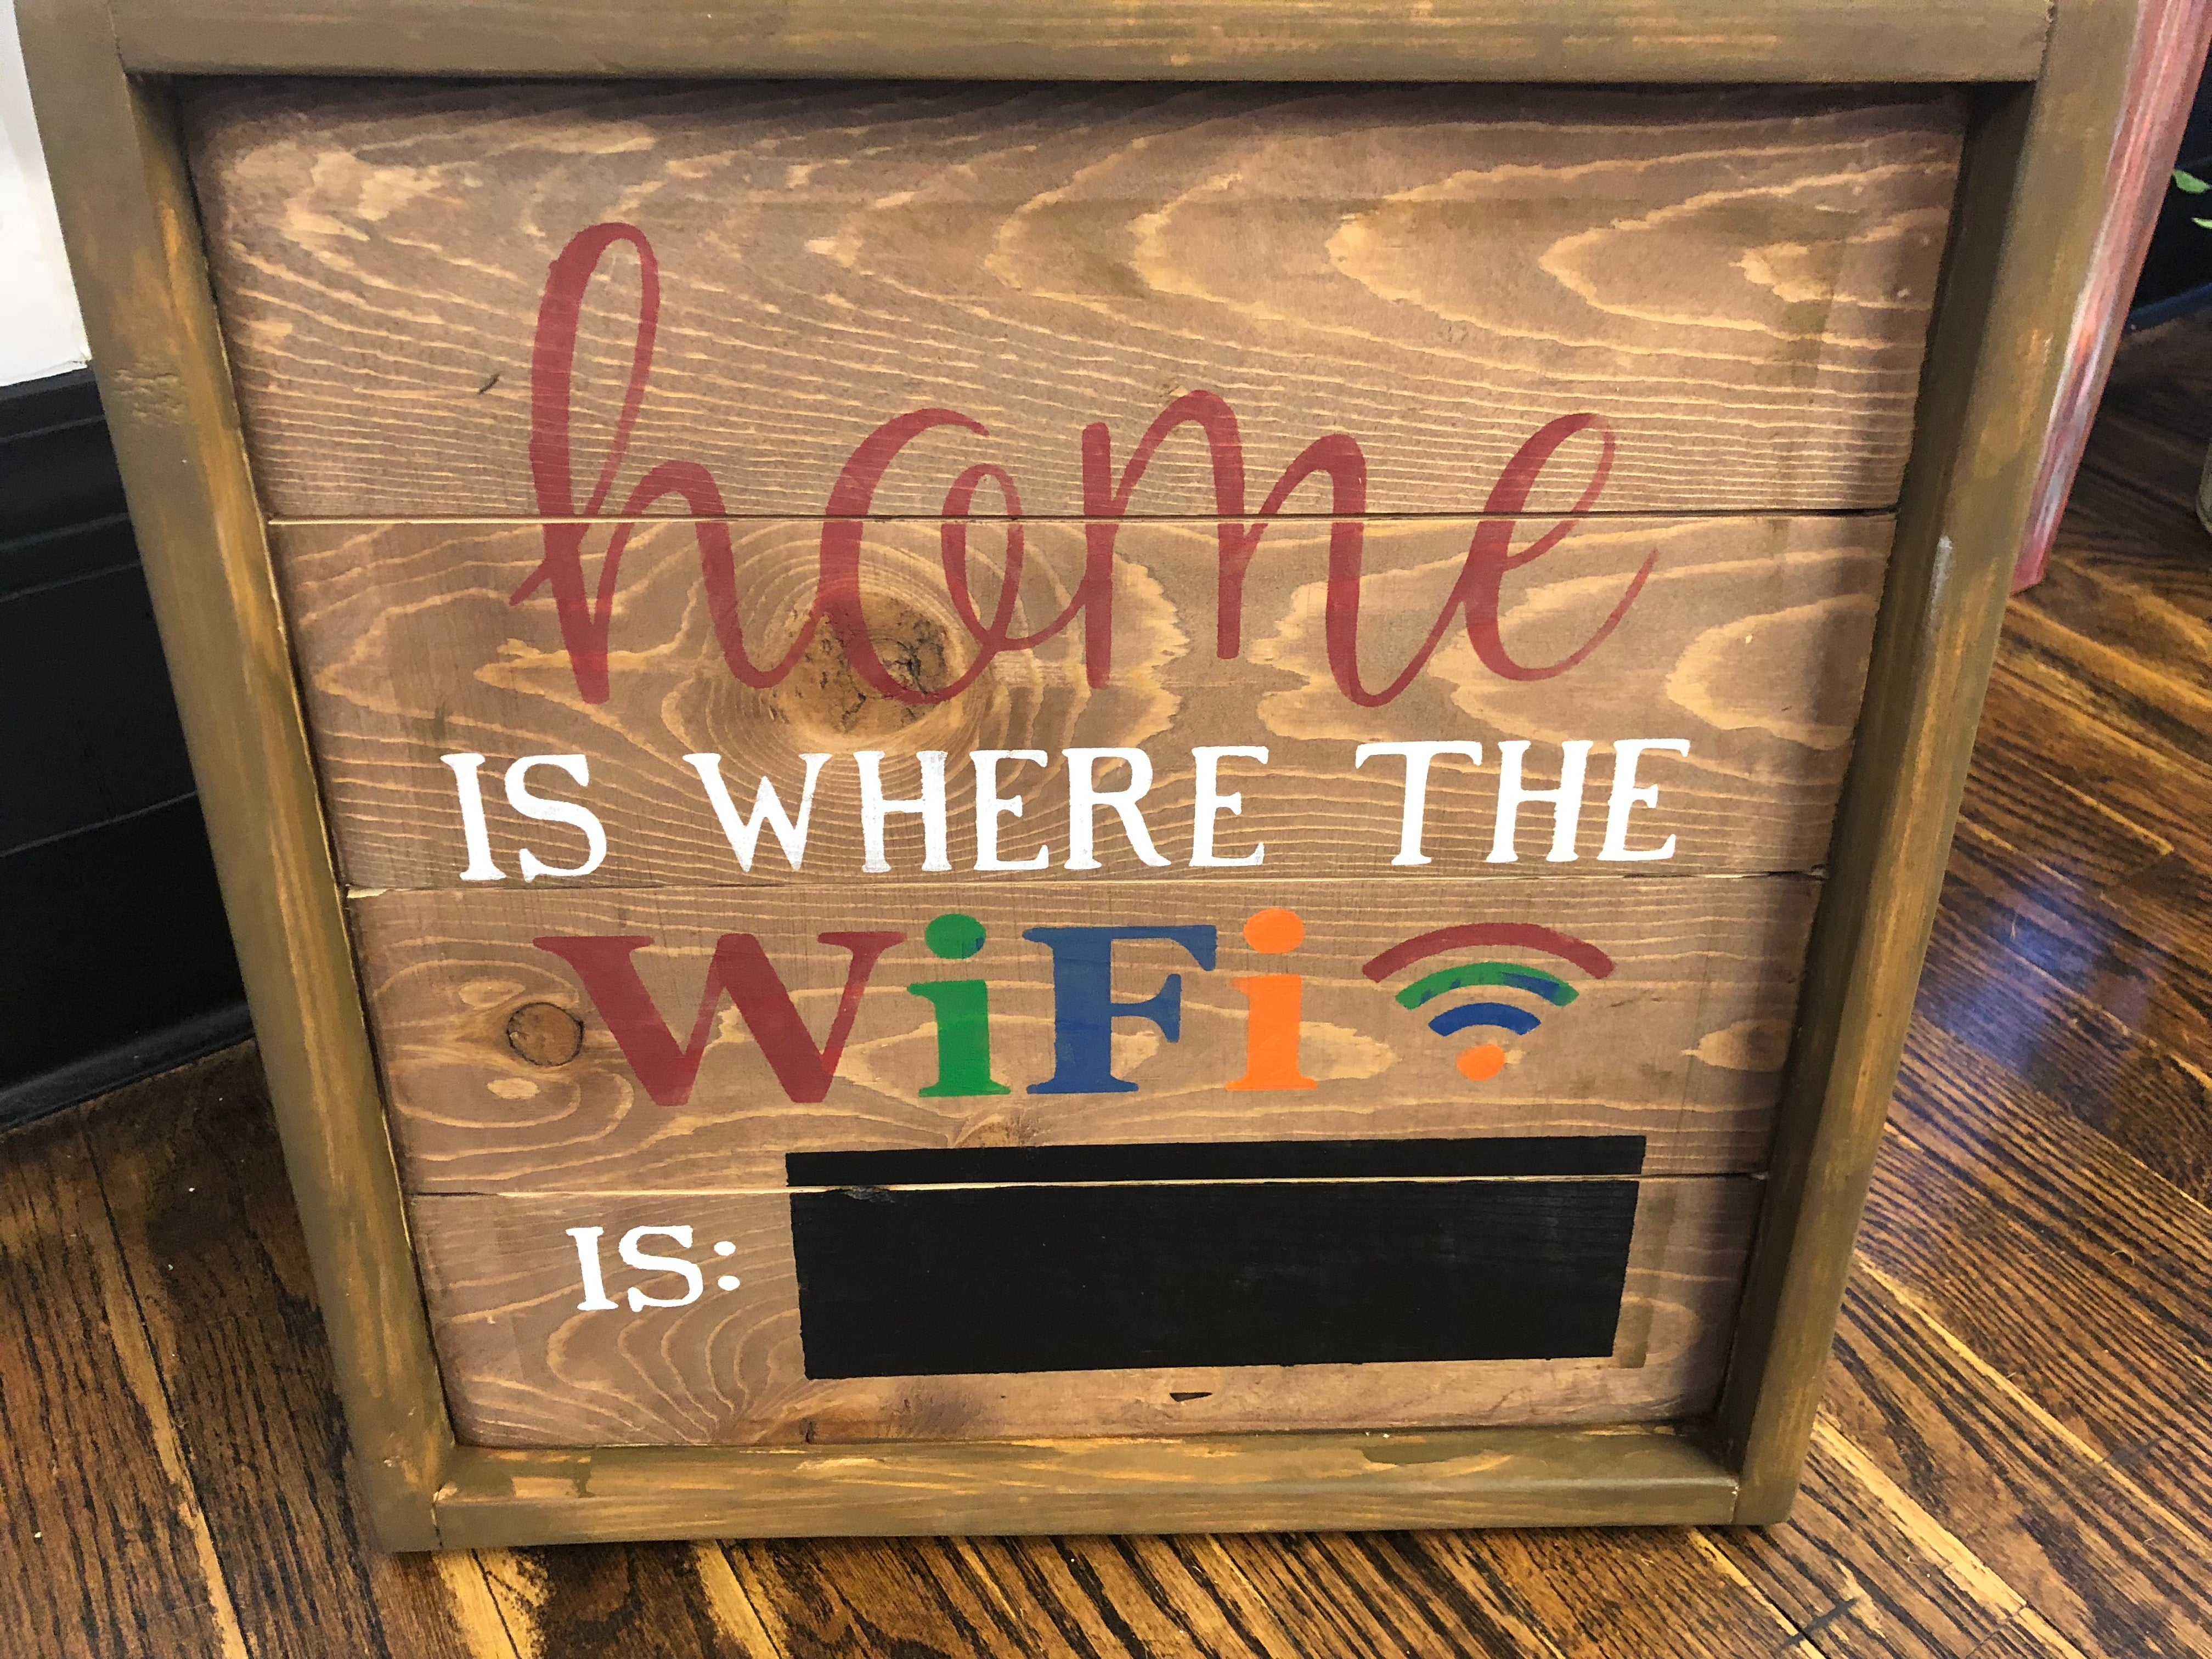 Home is where the wifi is: - Chalkboard password